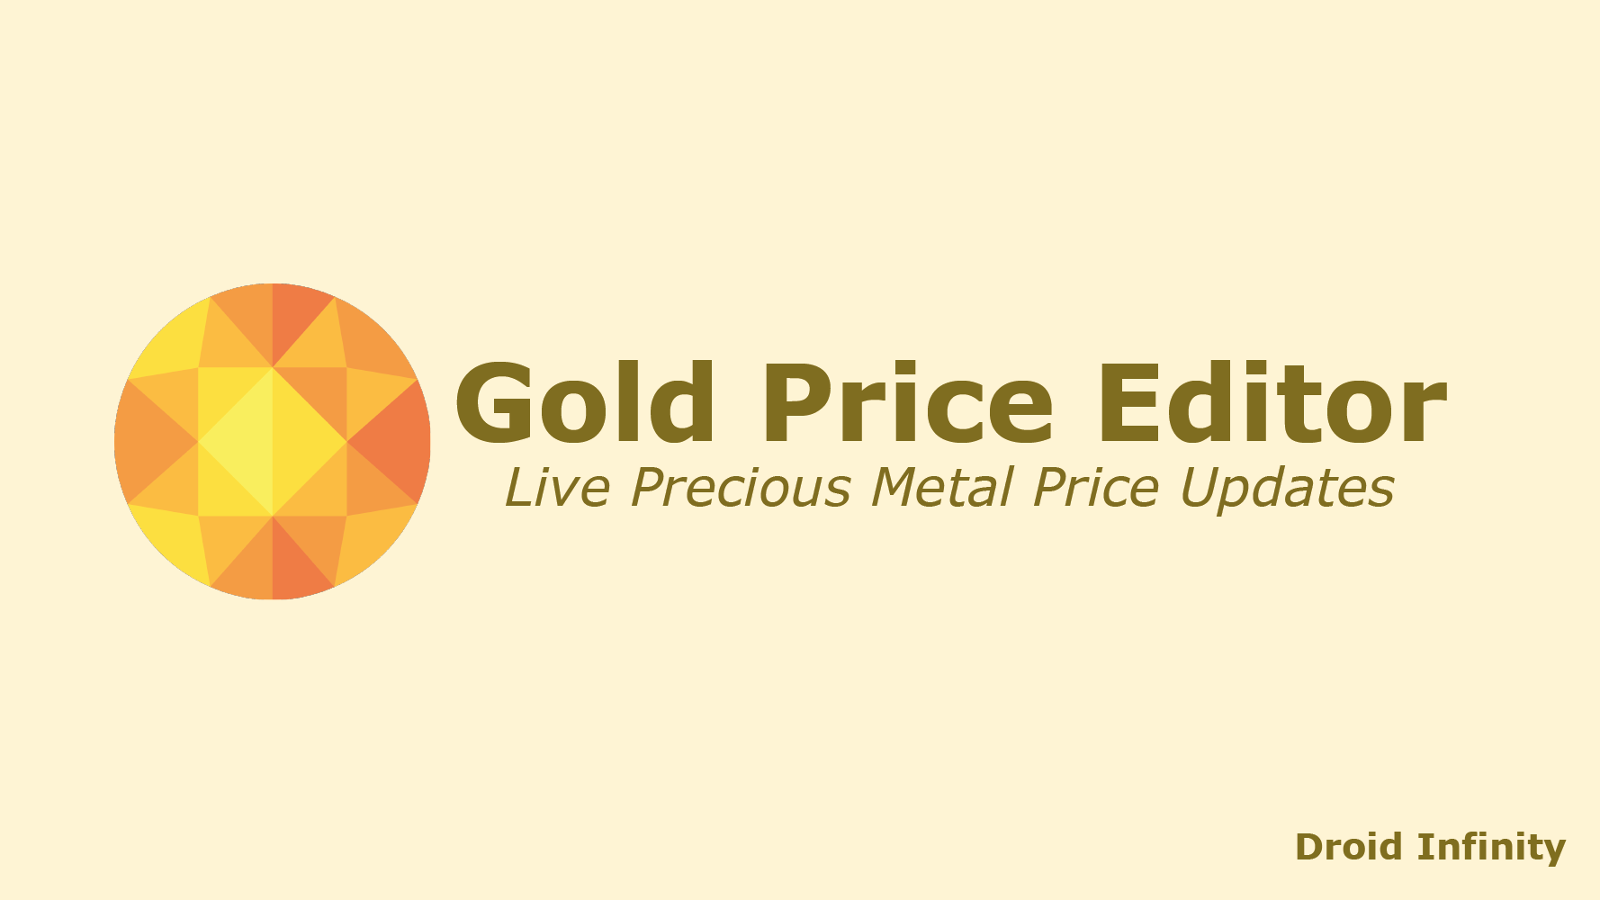 Application Live Gold Price Editor